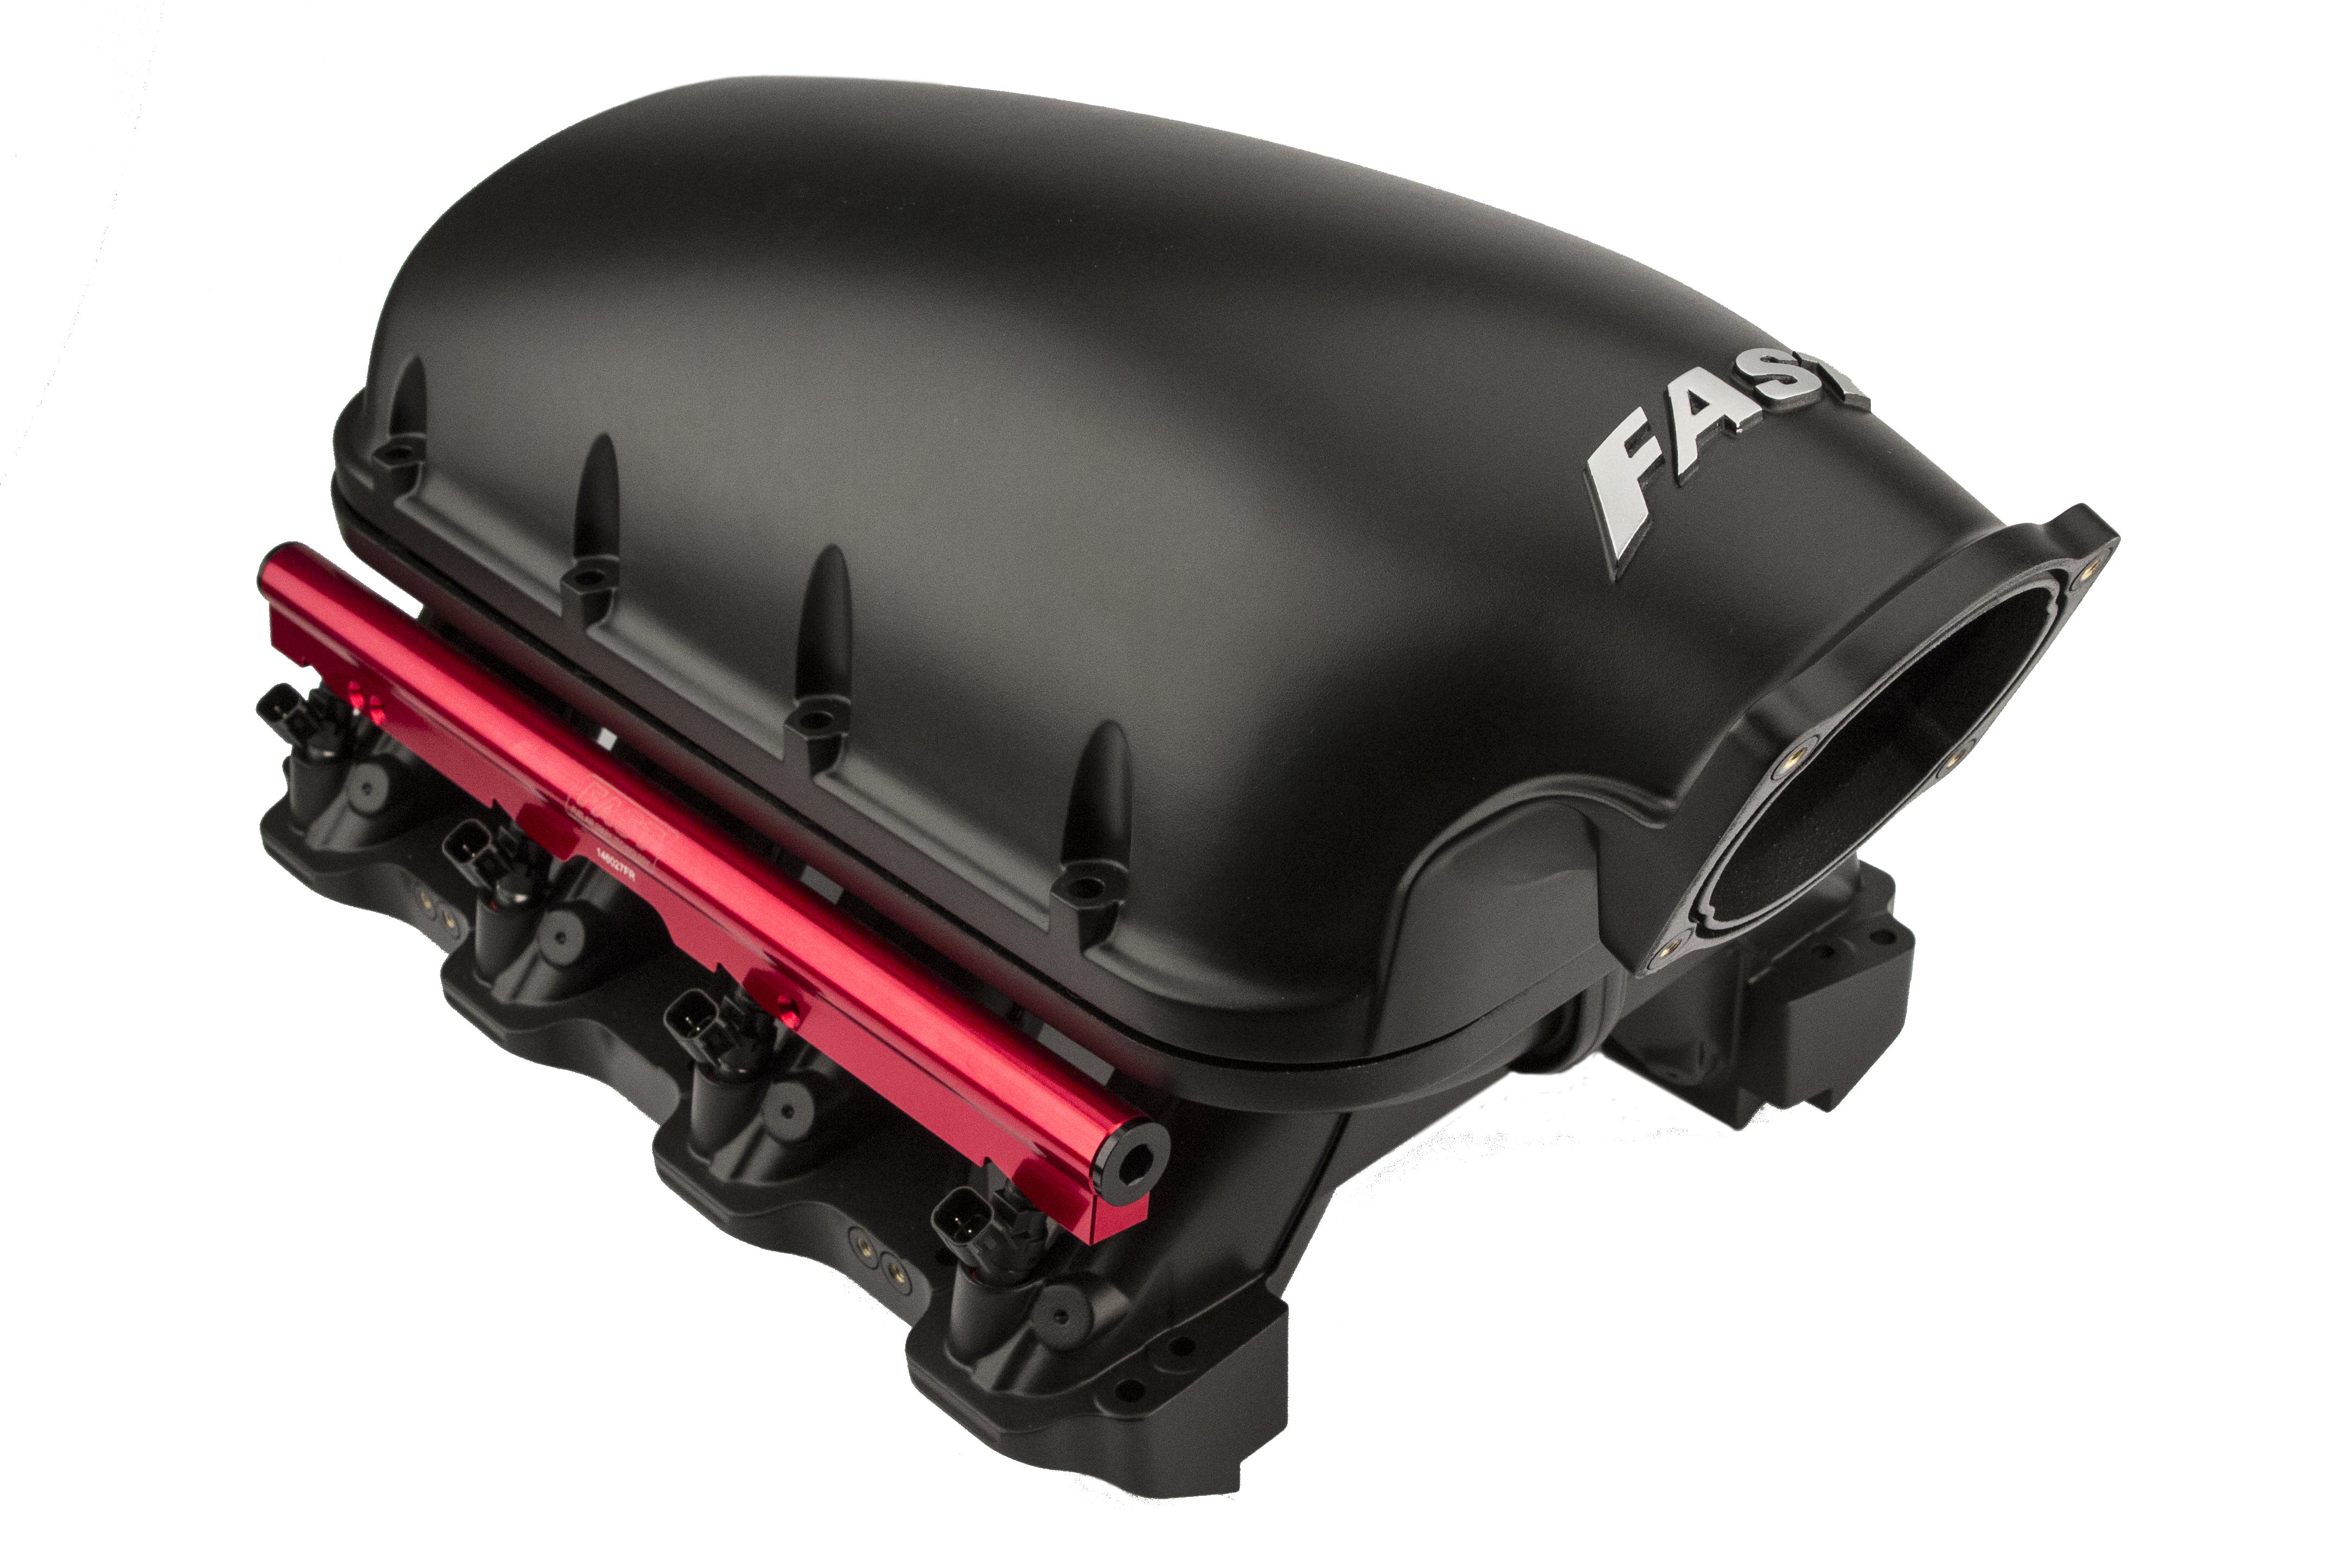 FAST - Fuel Air Spark Technology 146204 LSXHR 103mm Intake Manifold for Raised Rectangular Port LS7